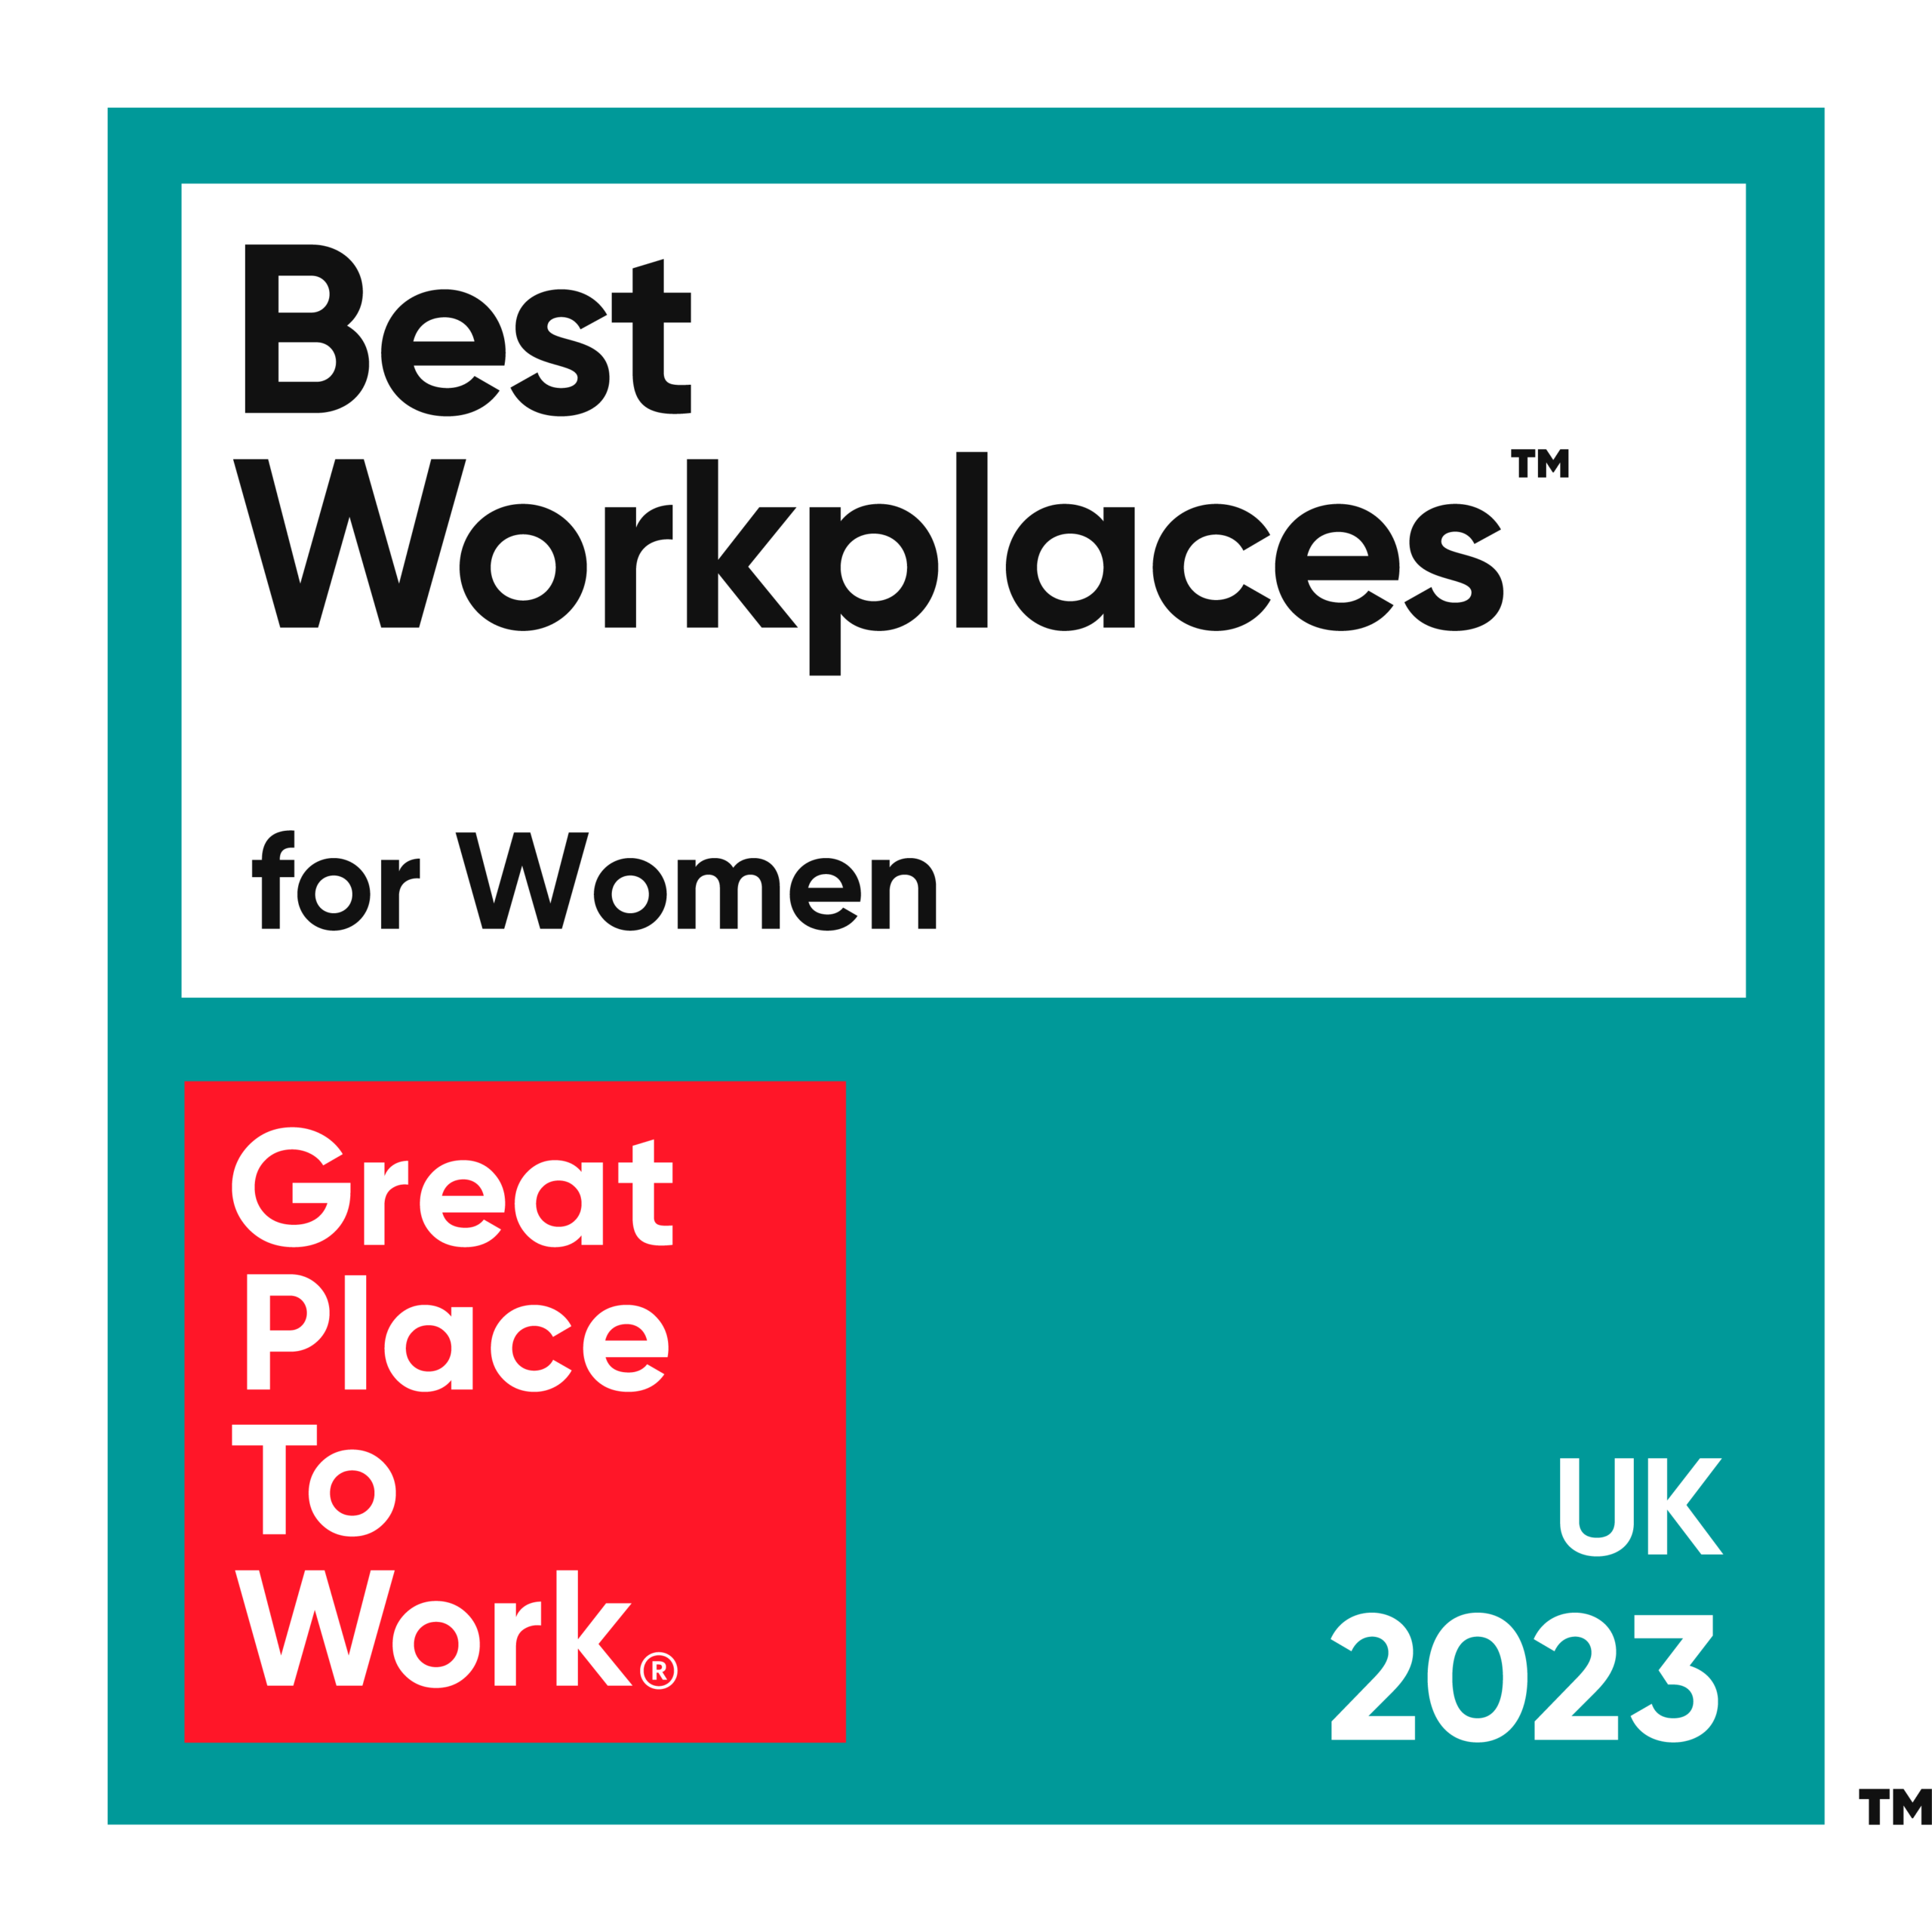 Great place to work for women award 2023